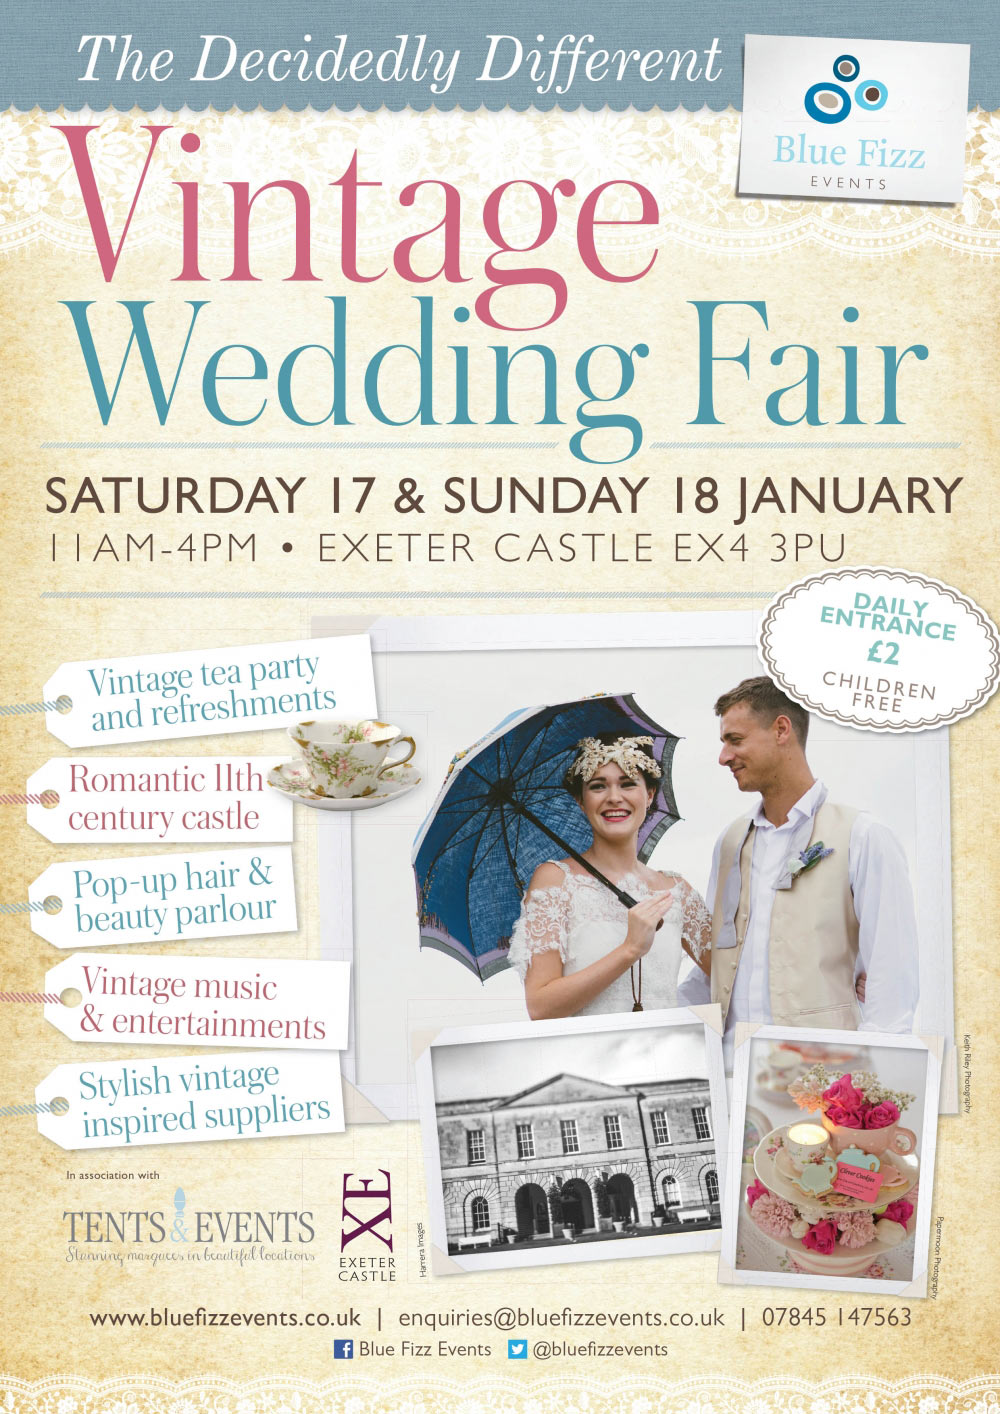 The Decidedly Different Vintage Wedding Fair